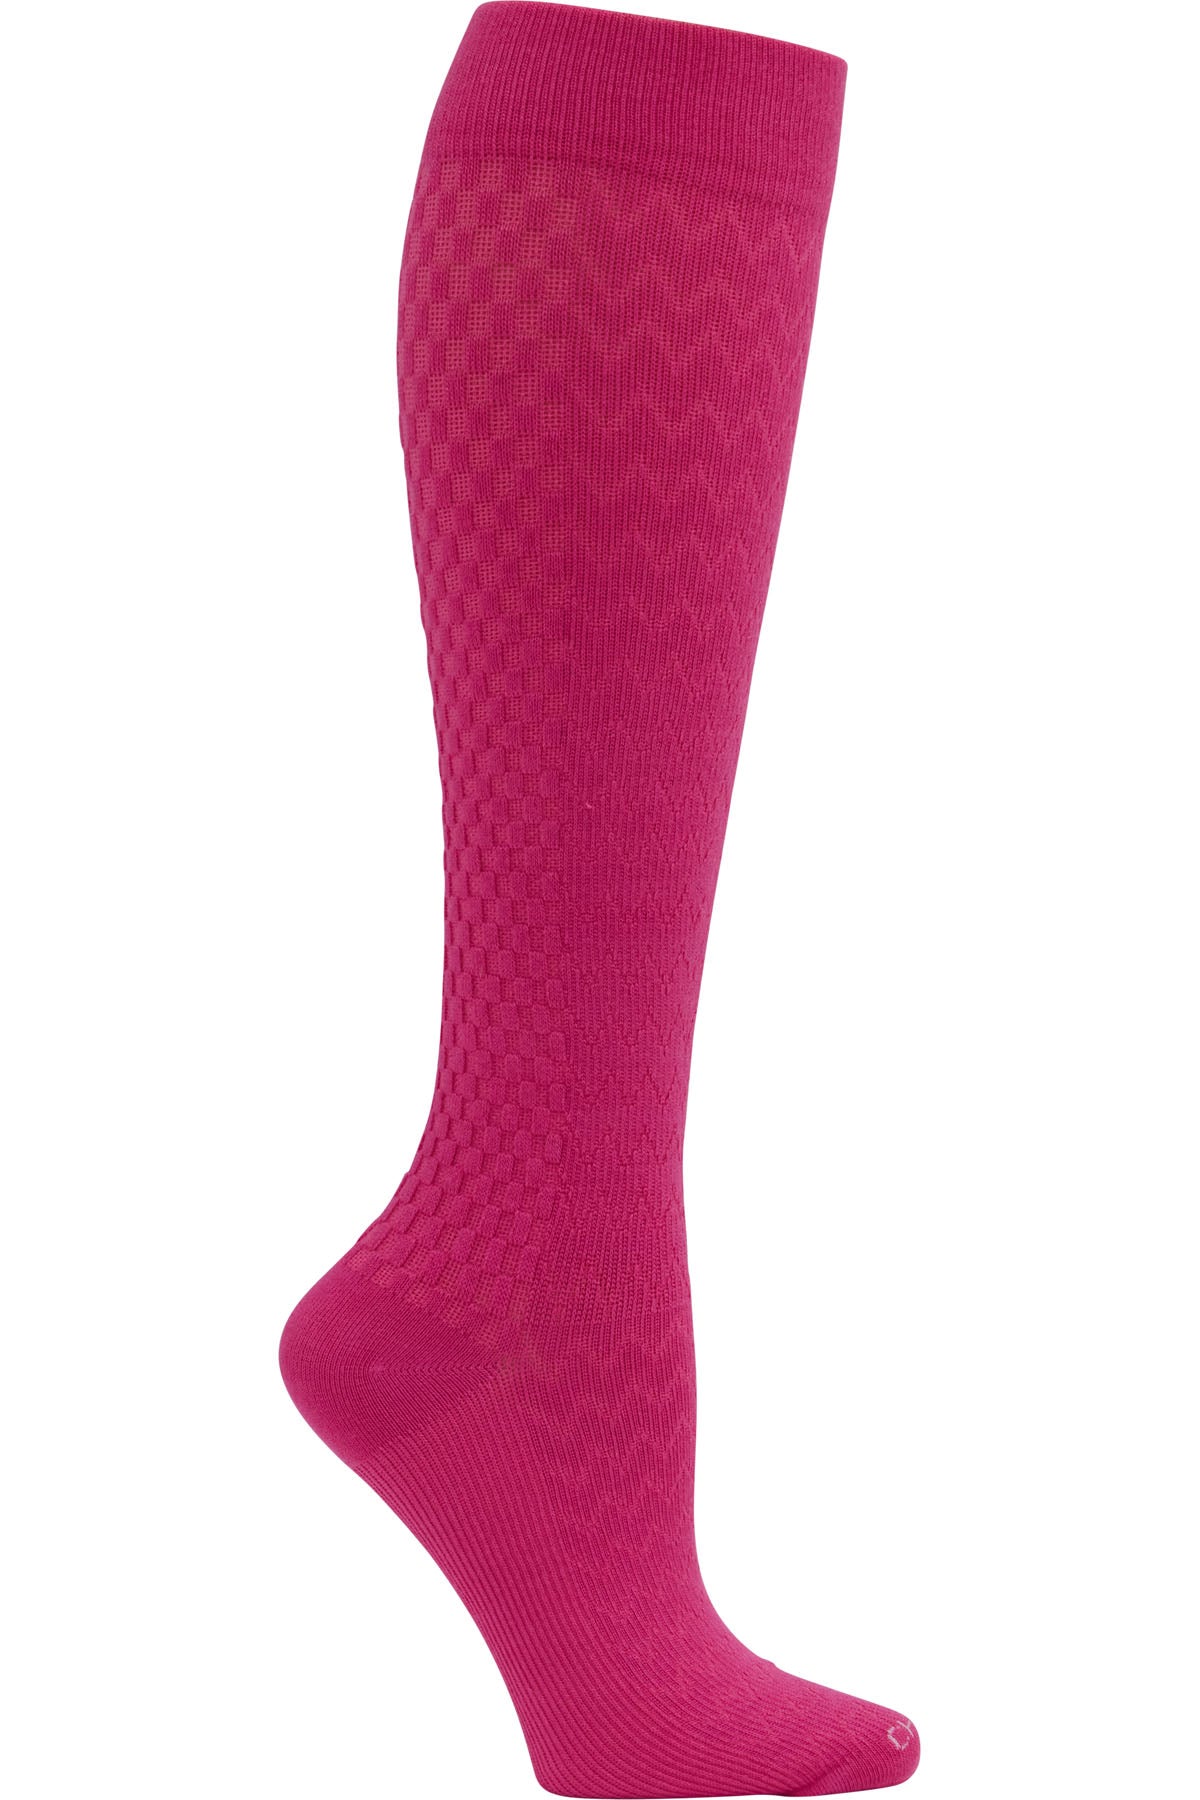 Cherokee Plus Size Mild Compression Wide Calf Socks True Support 10-15 mmHg in Brilliant at Parker's Clothing and Shoes.